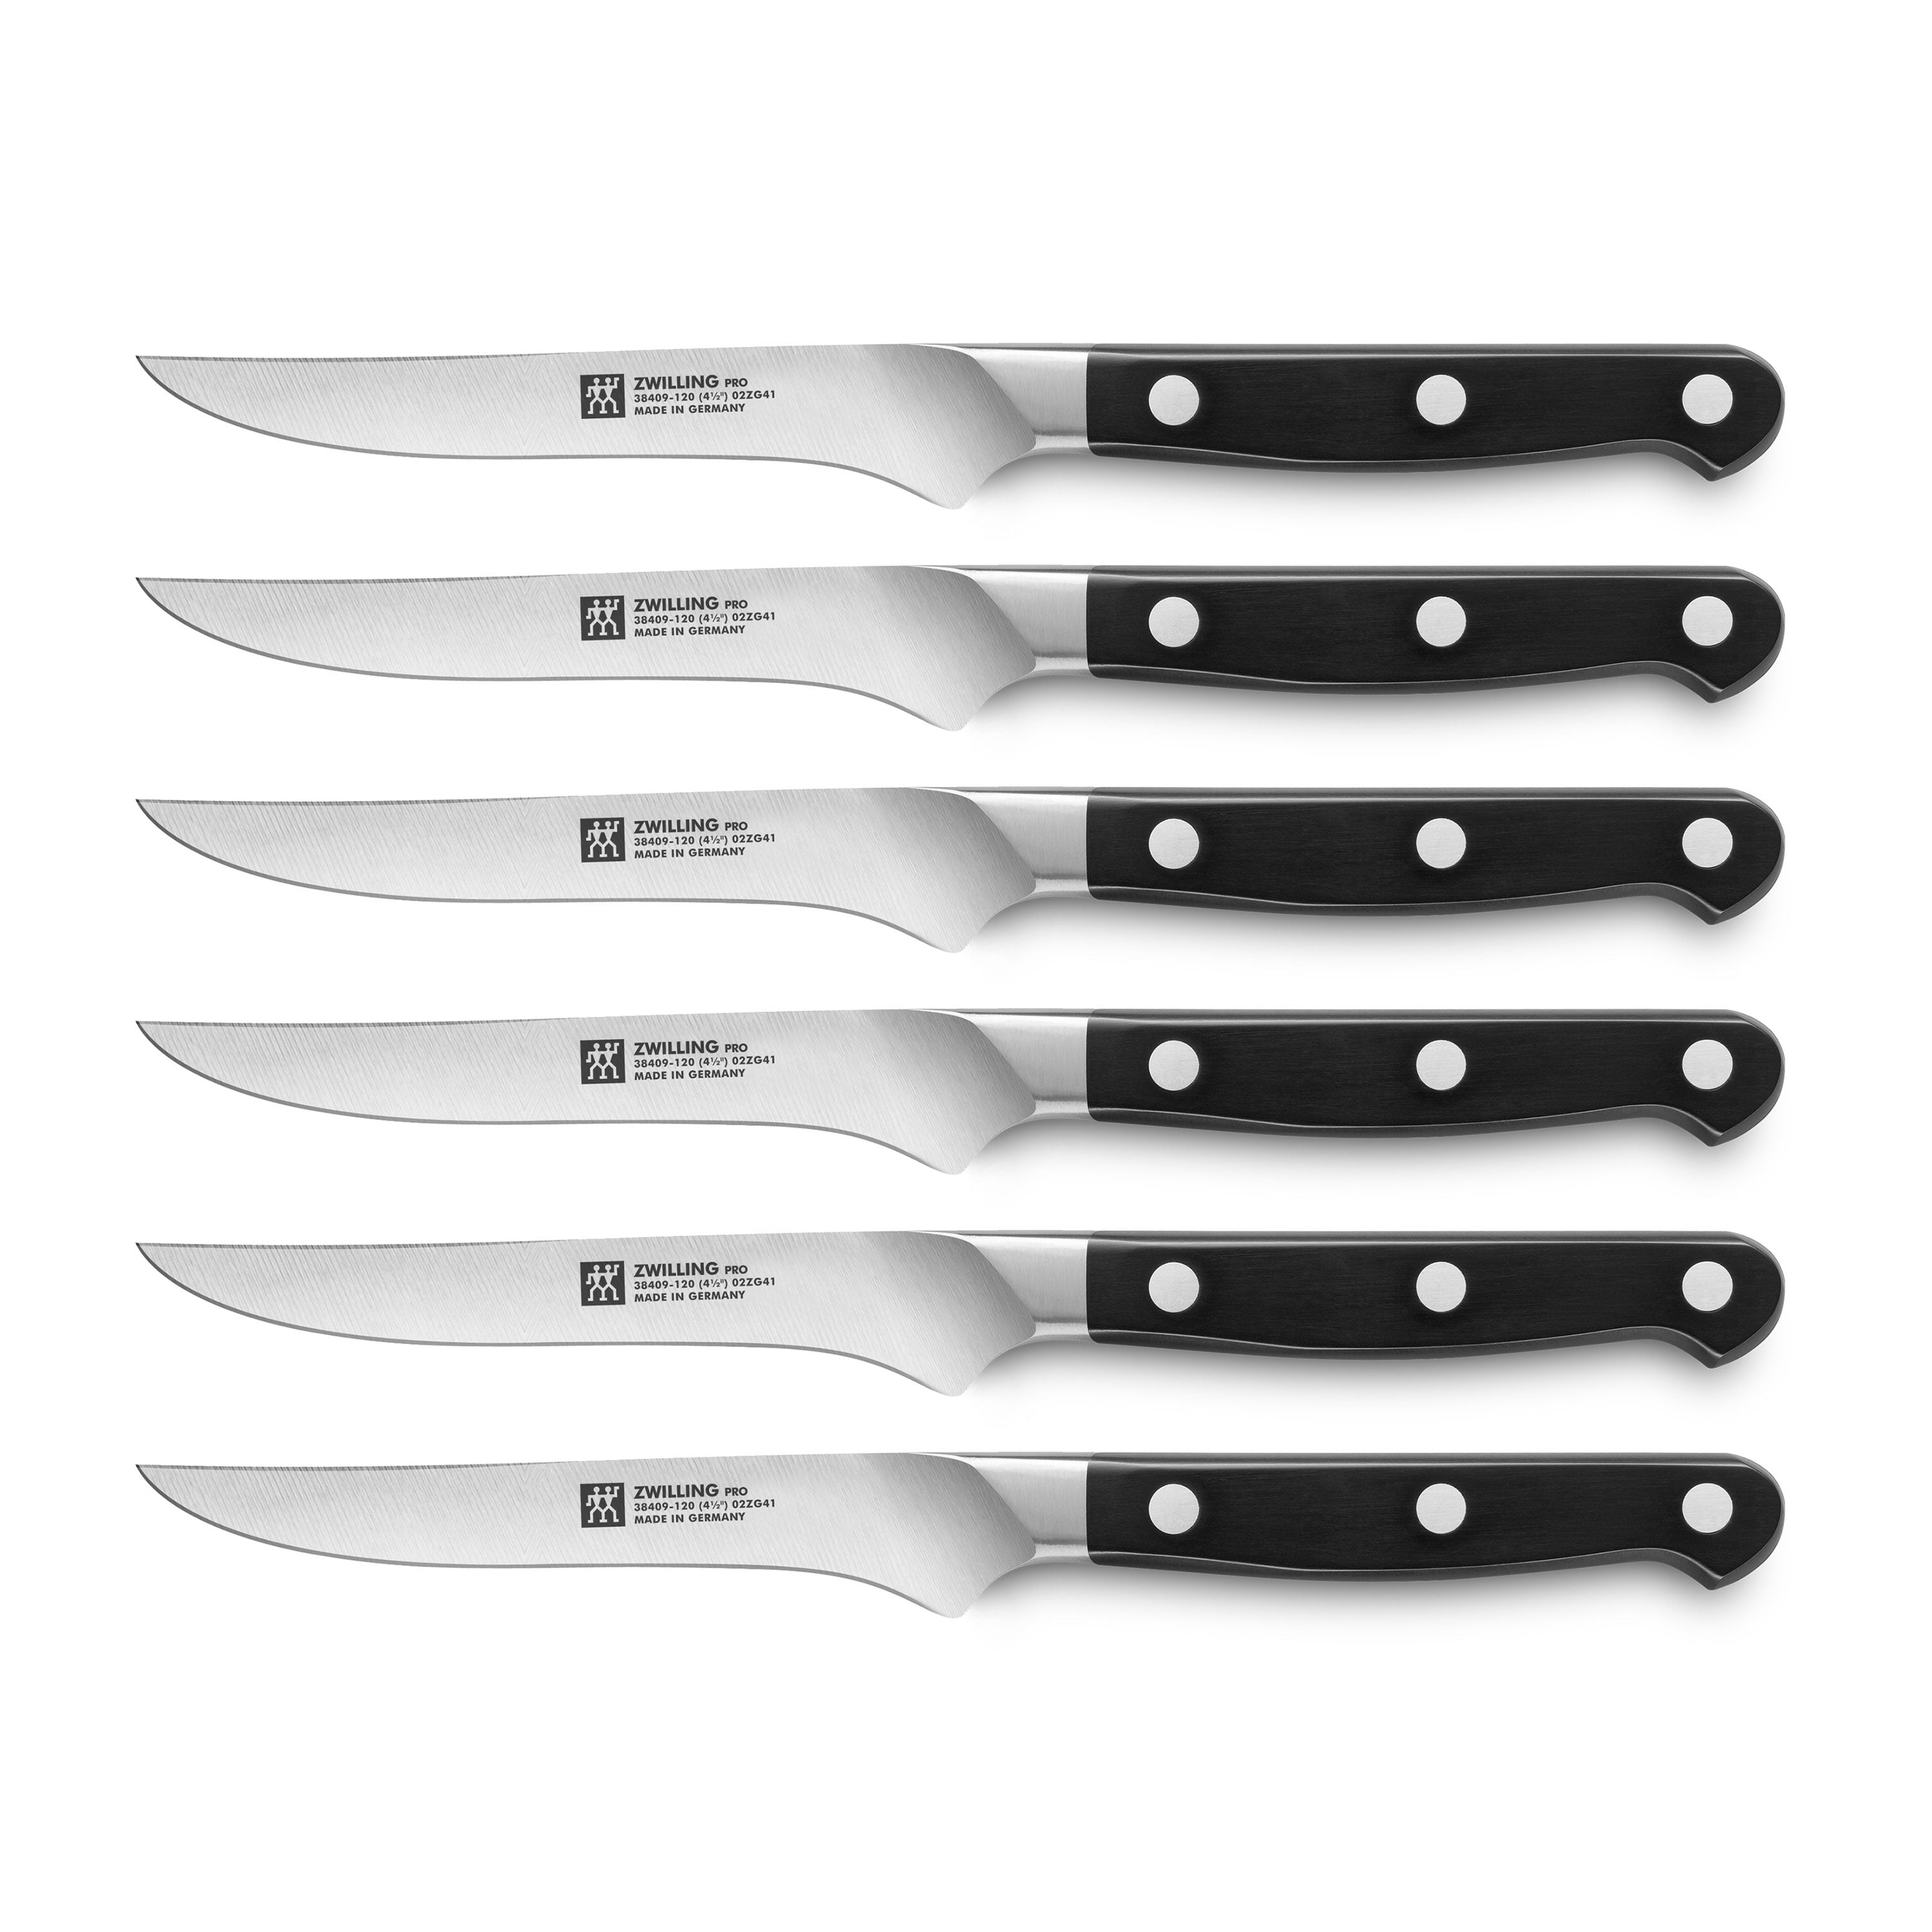 Steak Knives with White Lucite Handles, Set of 6 - Jung Lee NY